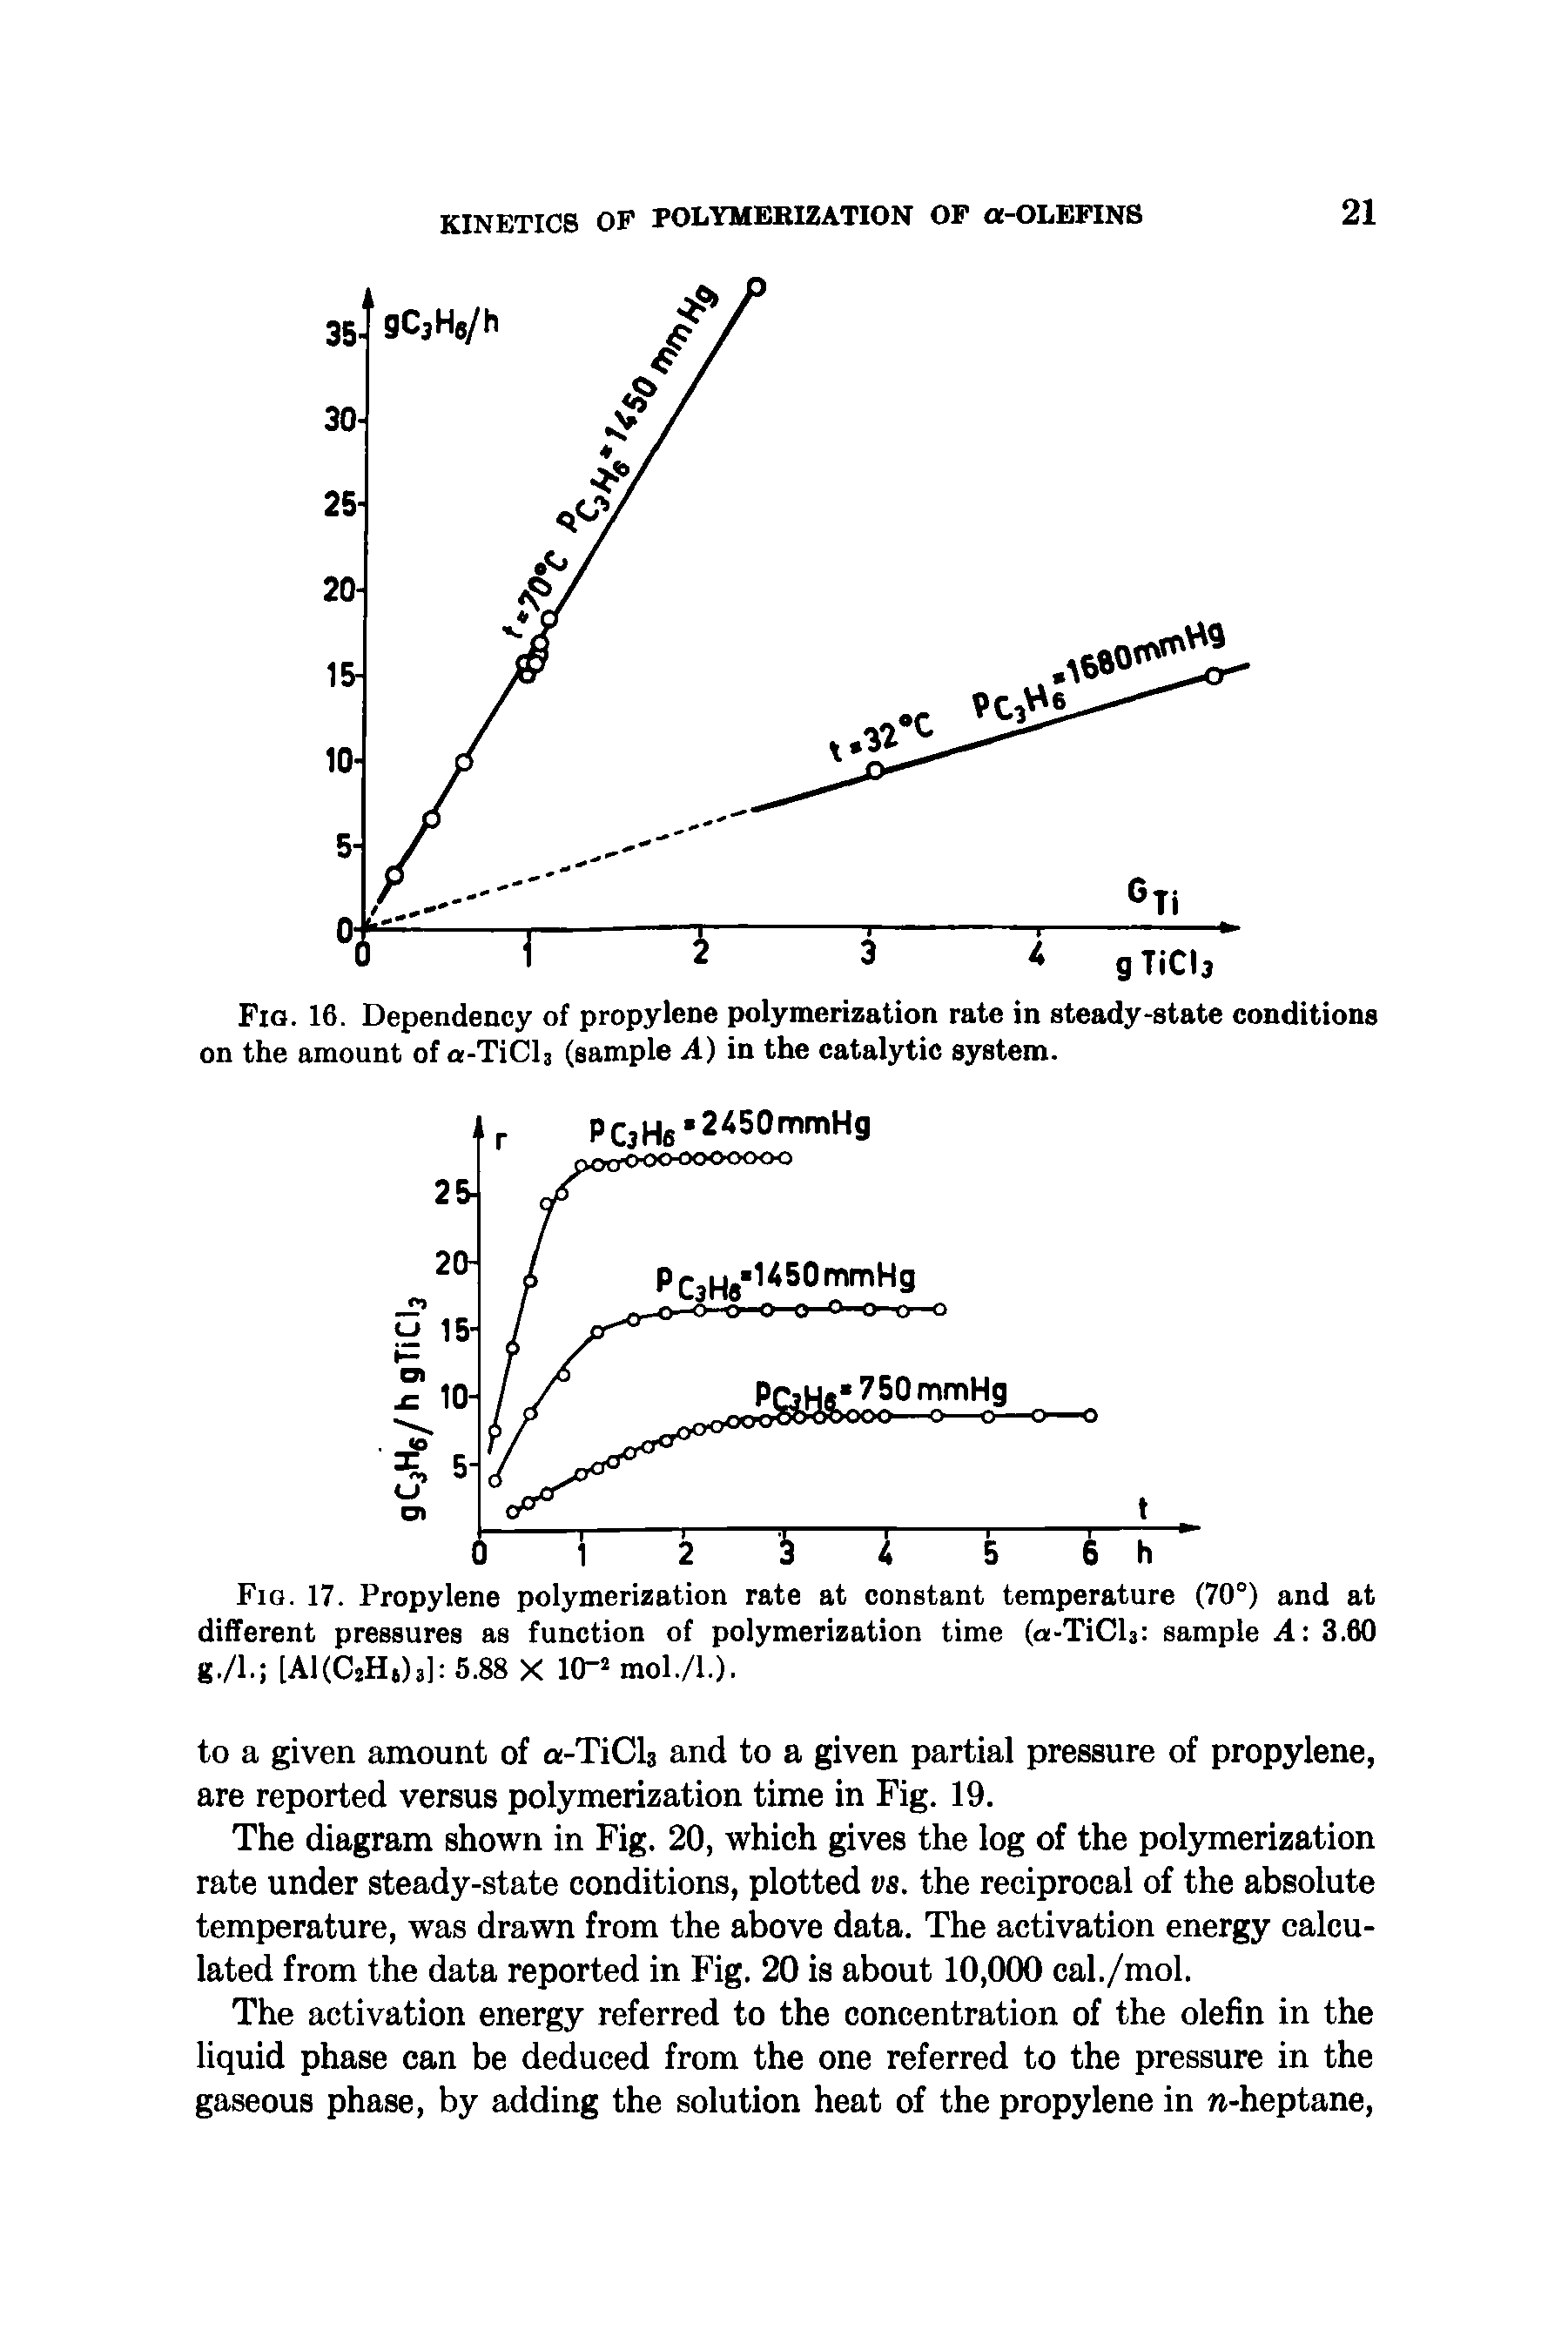 Fig. 17. Propylene polymerization rate at constant temperature (70°) and at different pressures as function of polymerization time (a-TiCU sample A 3.60 g./l. [AUCjH,),] 5.88 X 10- mol./l.).